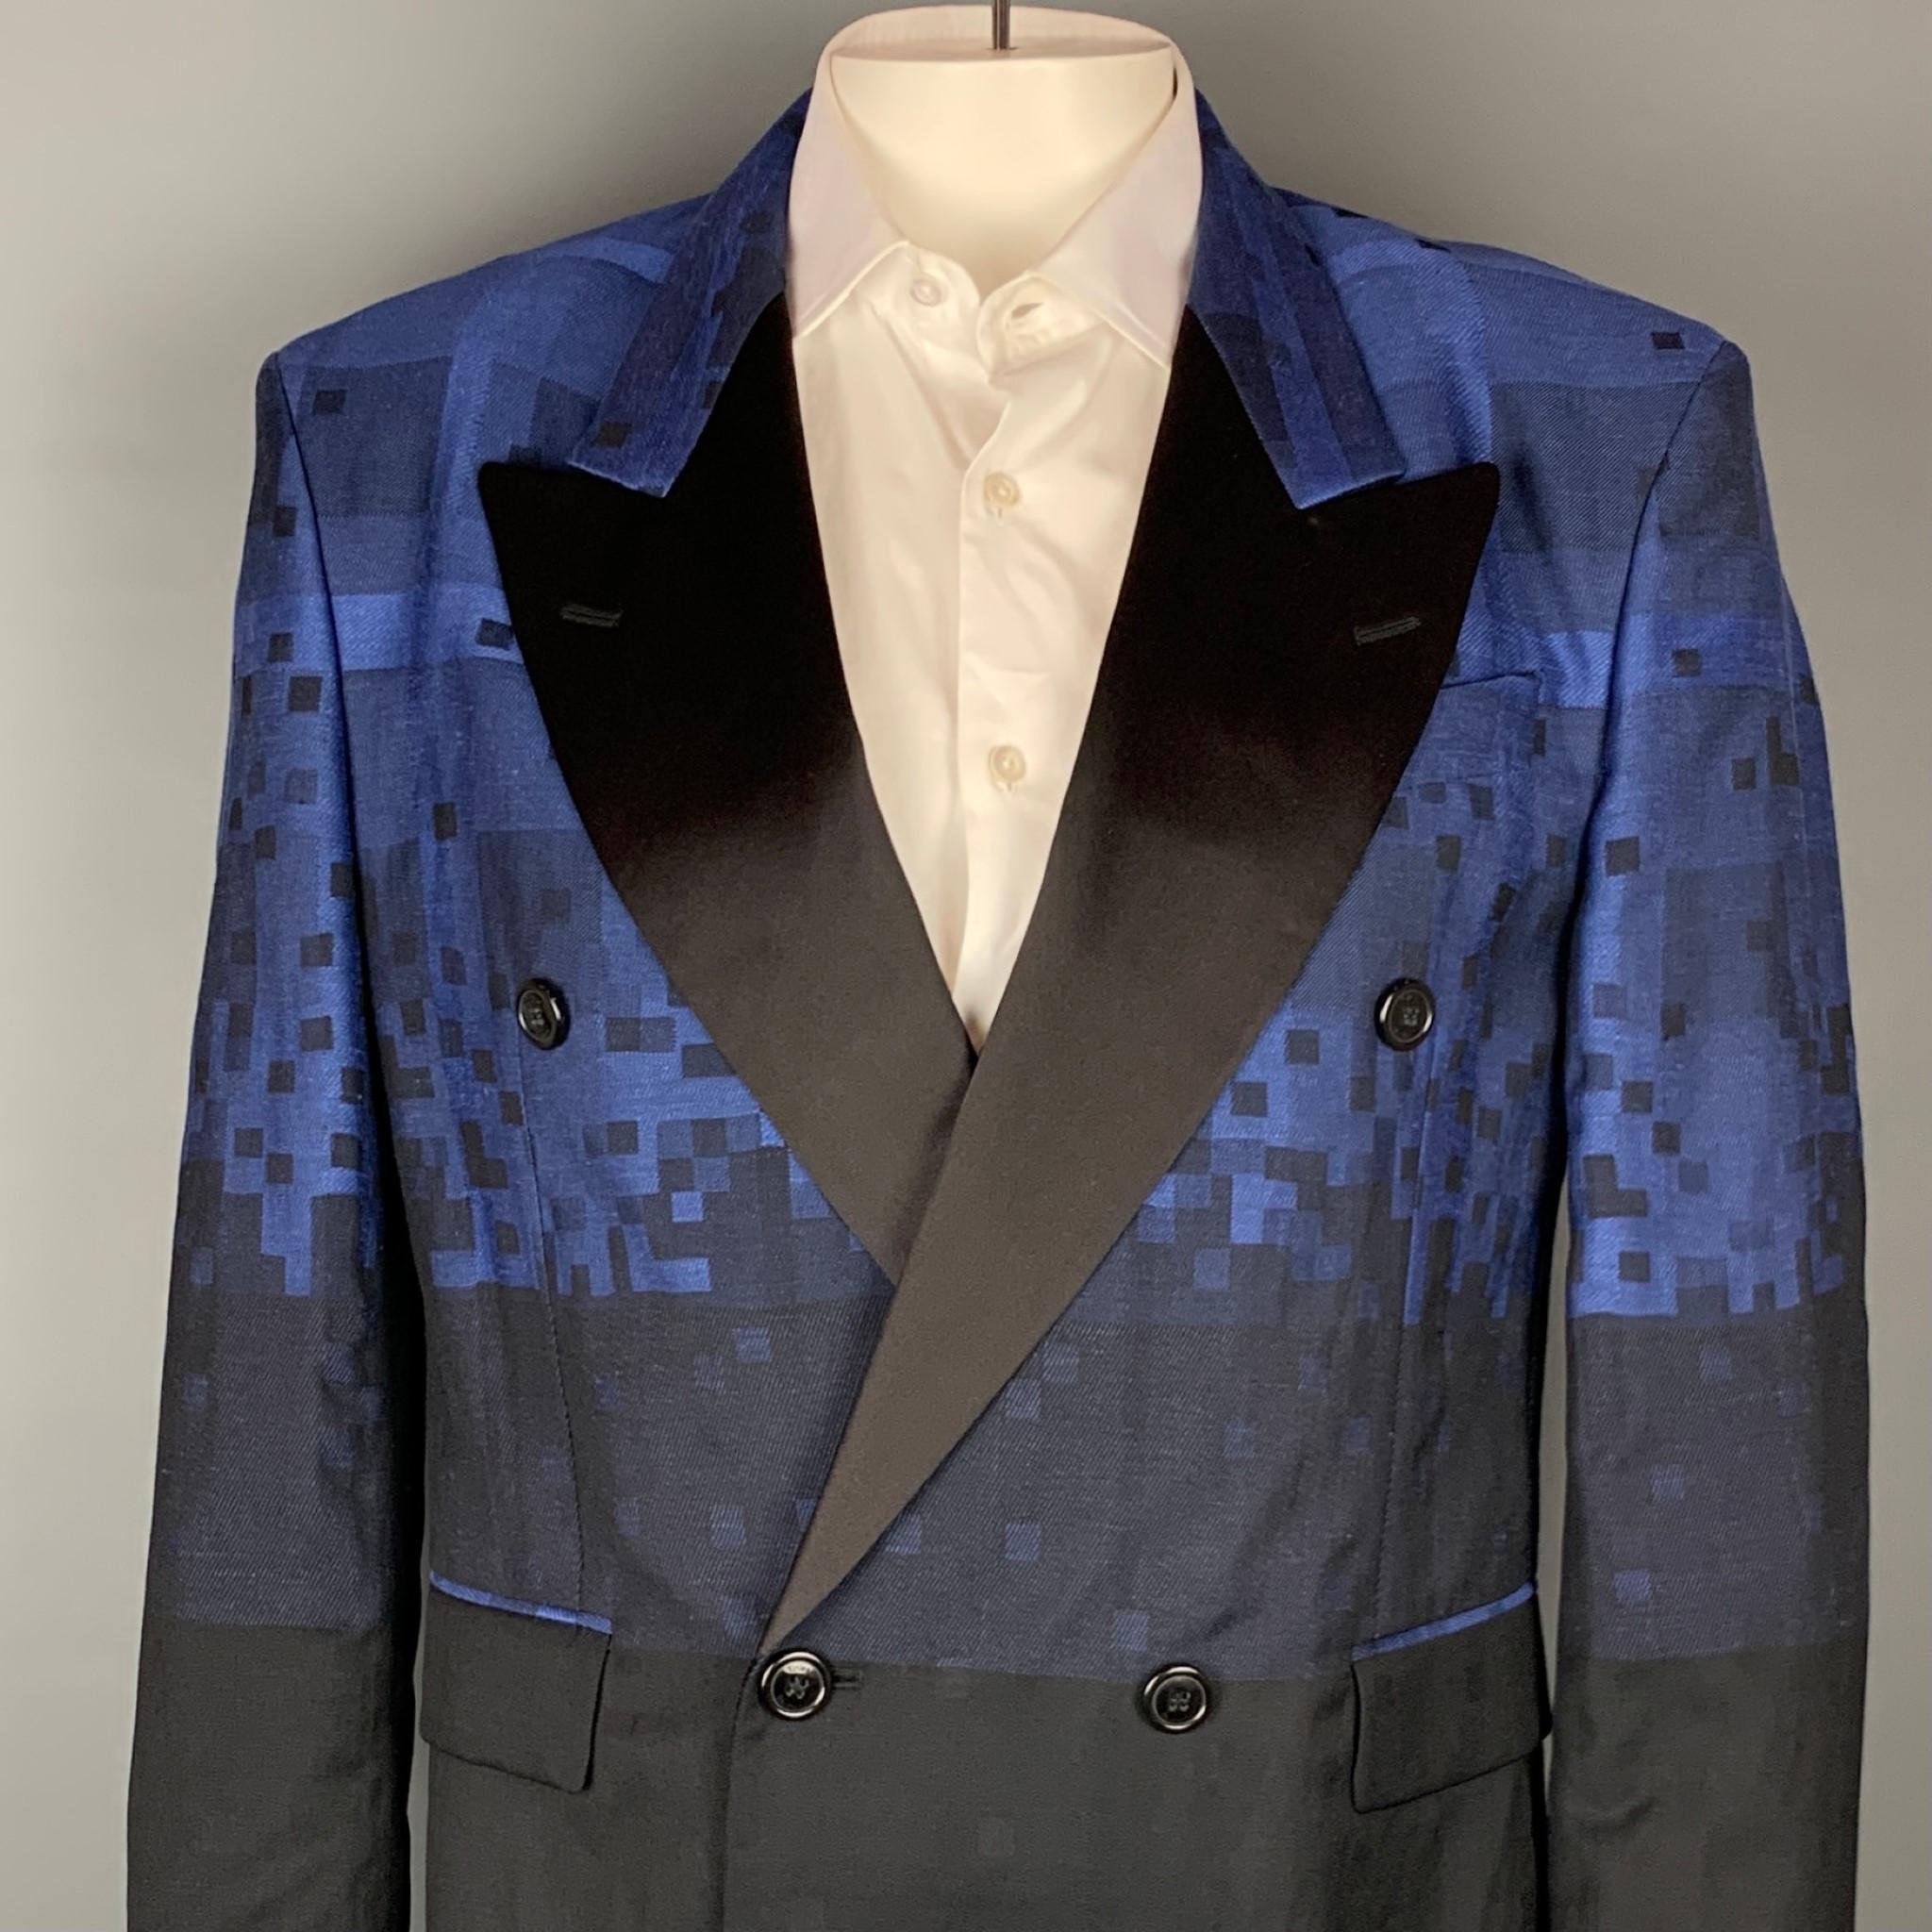 VIVIENNE WESTWOOD MAN sport coat comes in a blue & black square print wool blend with a half liner featuring a peak lapel, raw edge hem, shoulder pads, flap pockets, and a double breasted closure. Made in Italy.

Excellent Pre-Owned